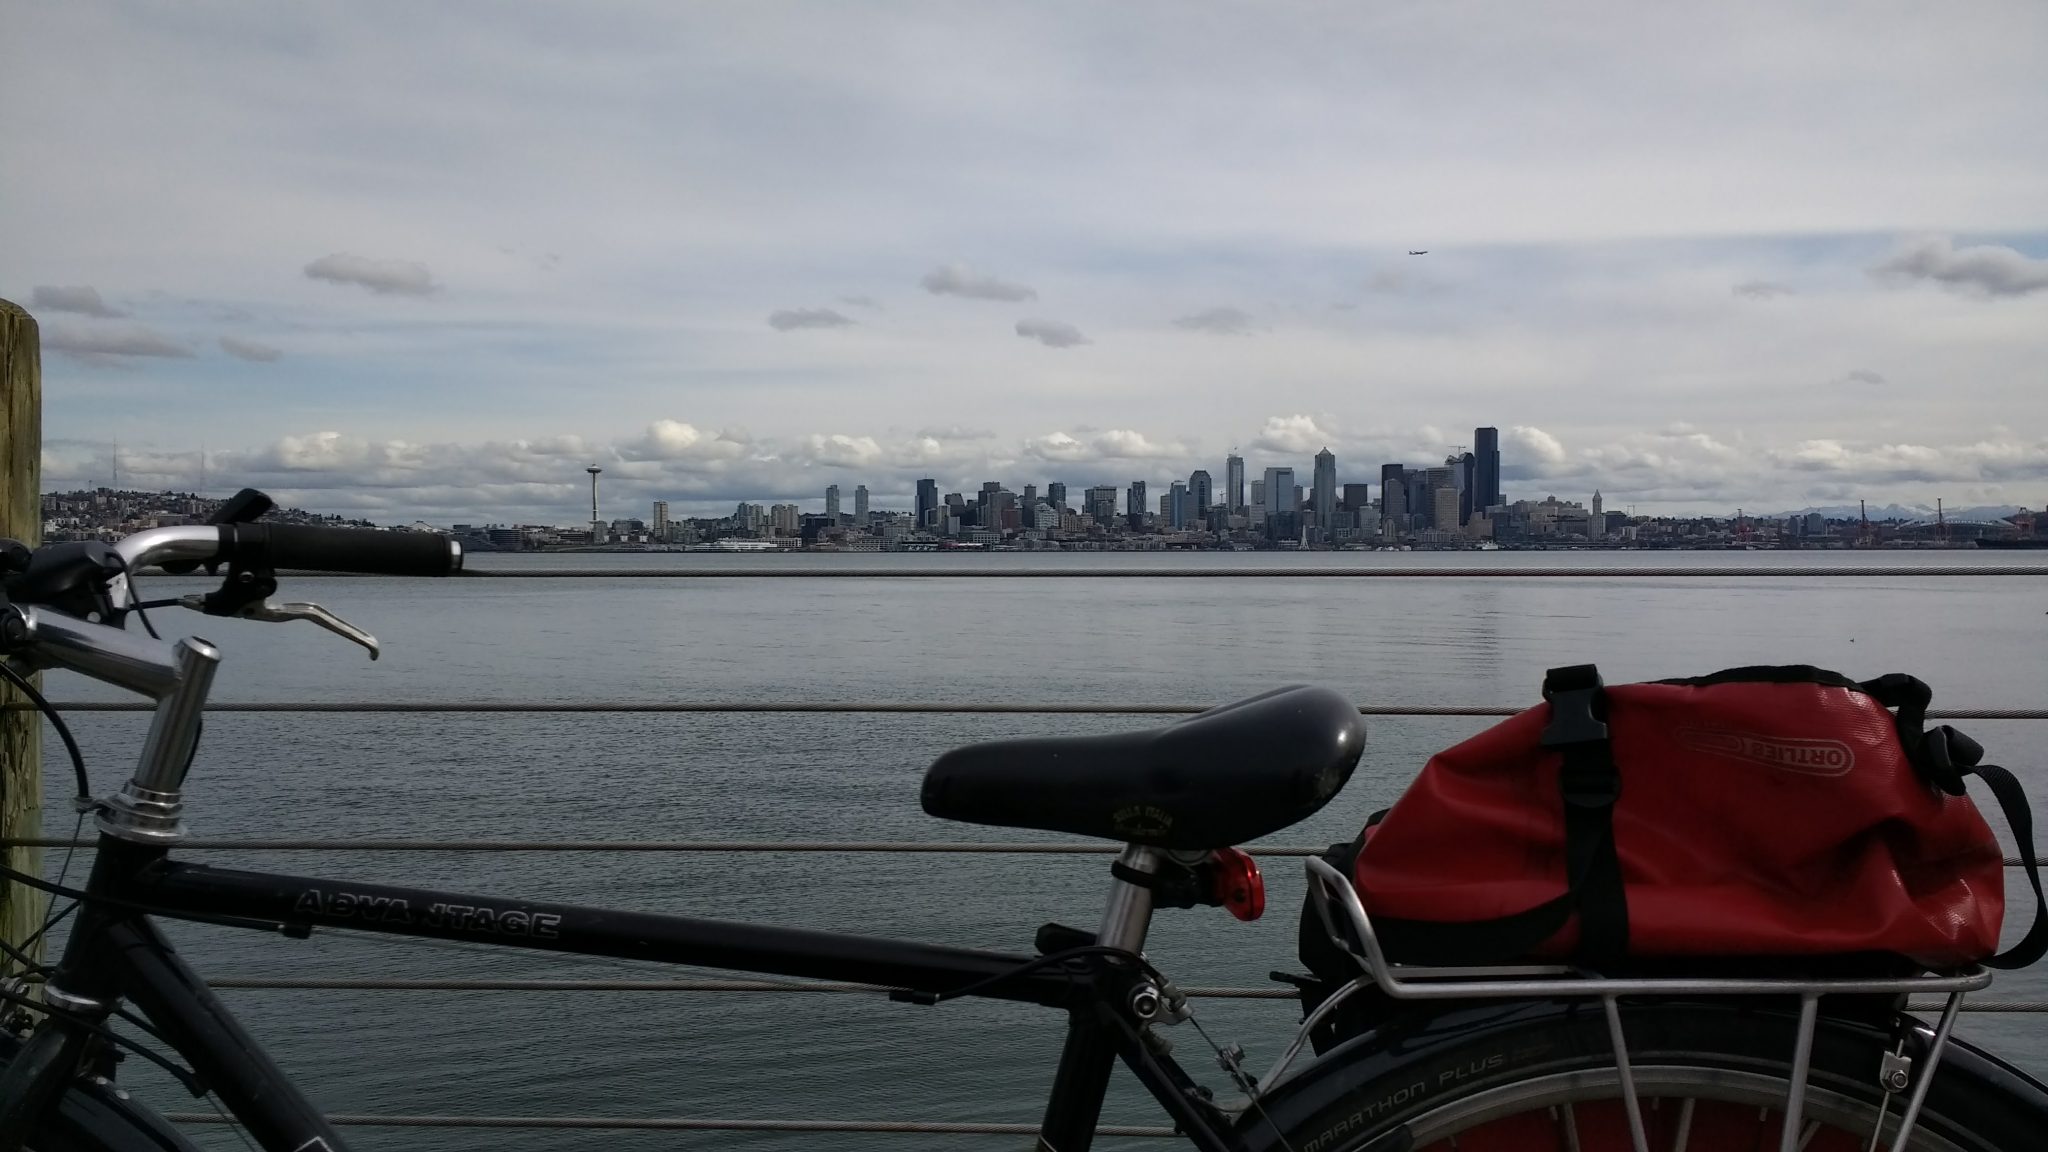 Outdoor activities in Seattle include cycling on the cities many trails. A plain black bike with a red back is in the foreground against a wire railing. There is gray water and gray sky. Across the water the Seattle skyline is visible, including the space needle